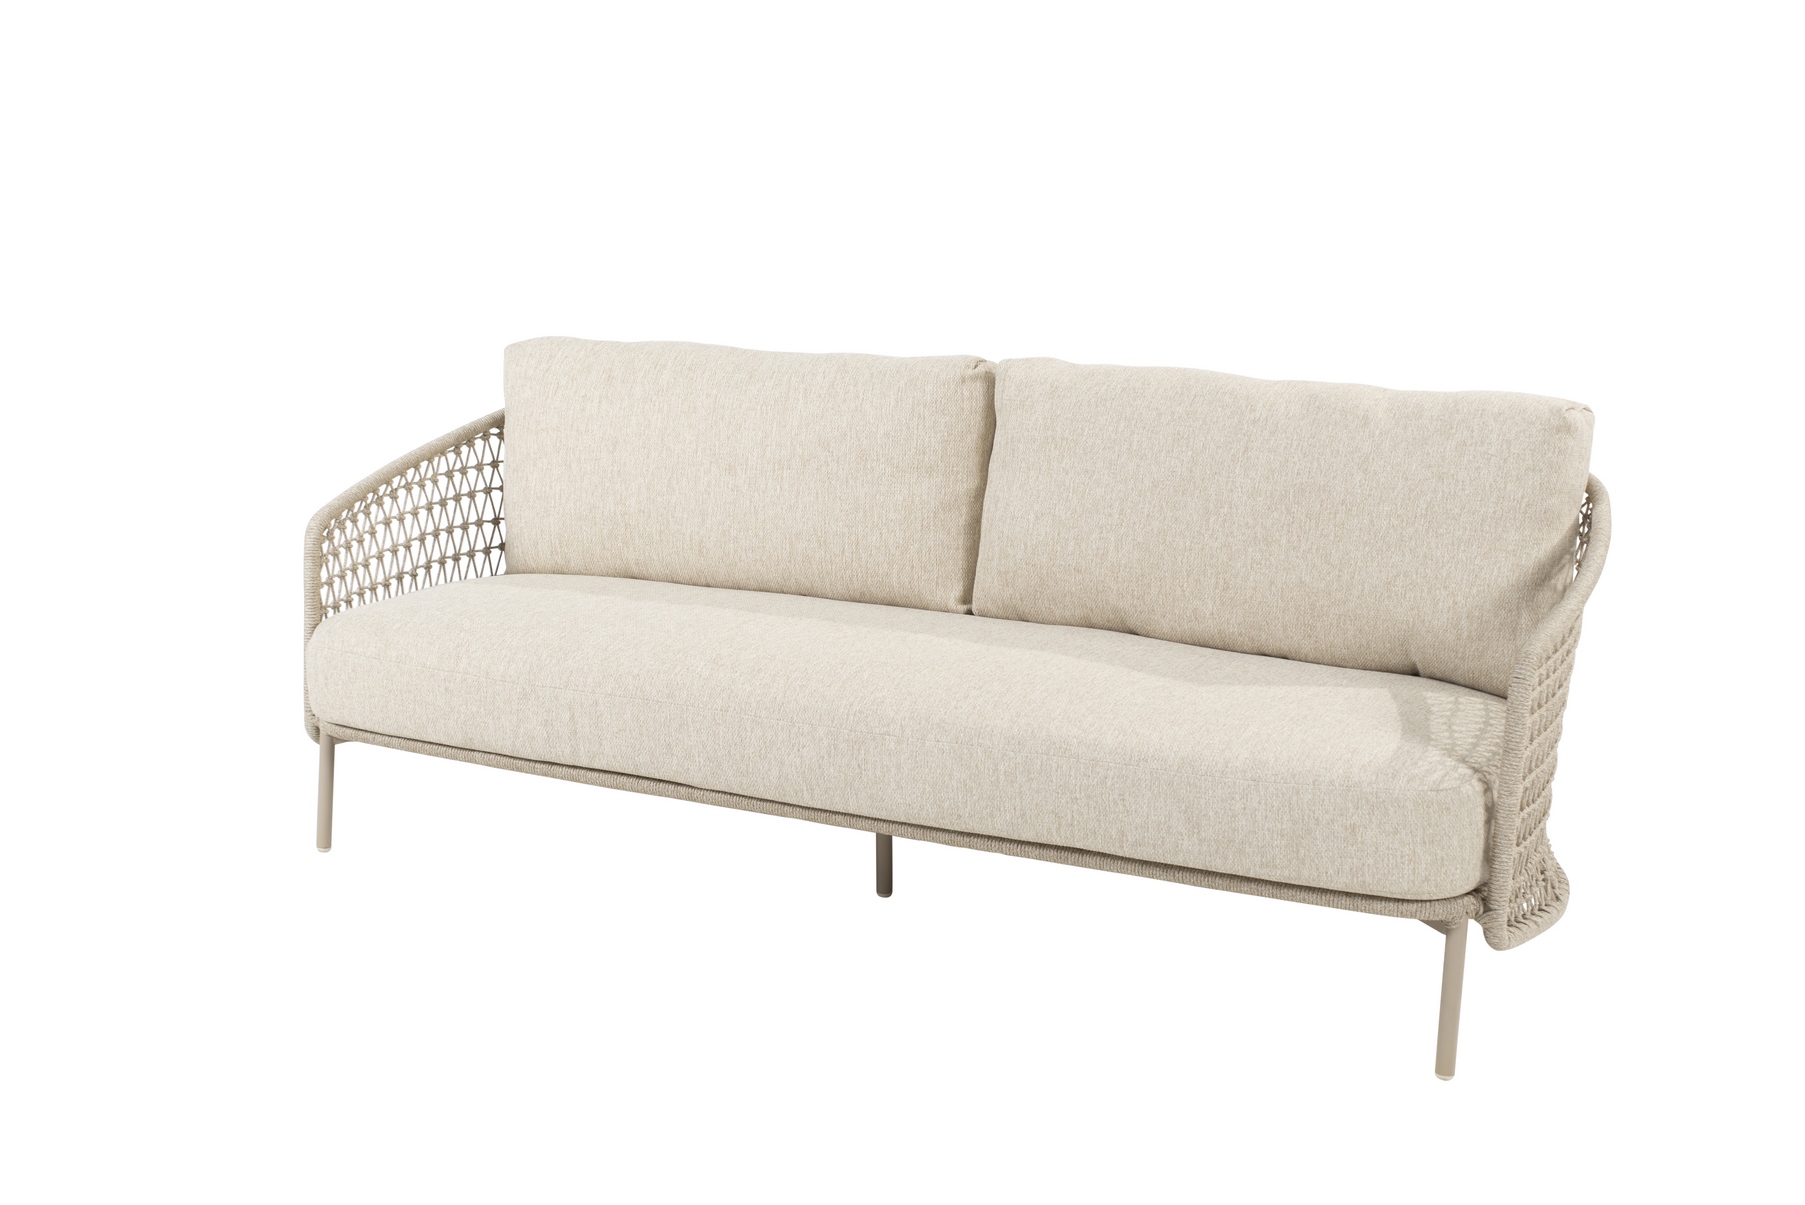 213937__Puccini_3_seater_bench_latte_with_3_cushions_01.jpg